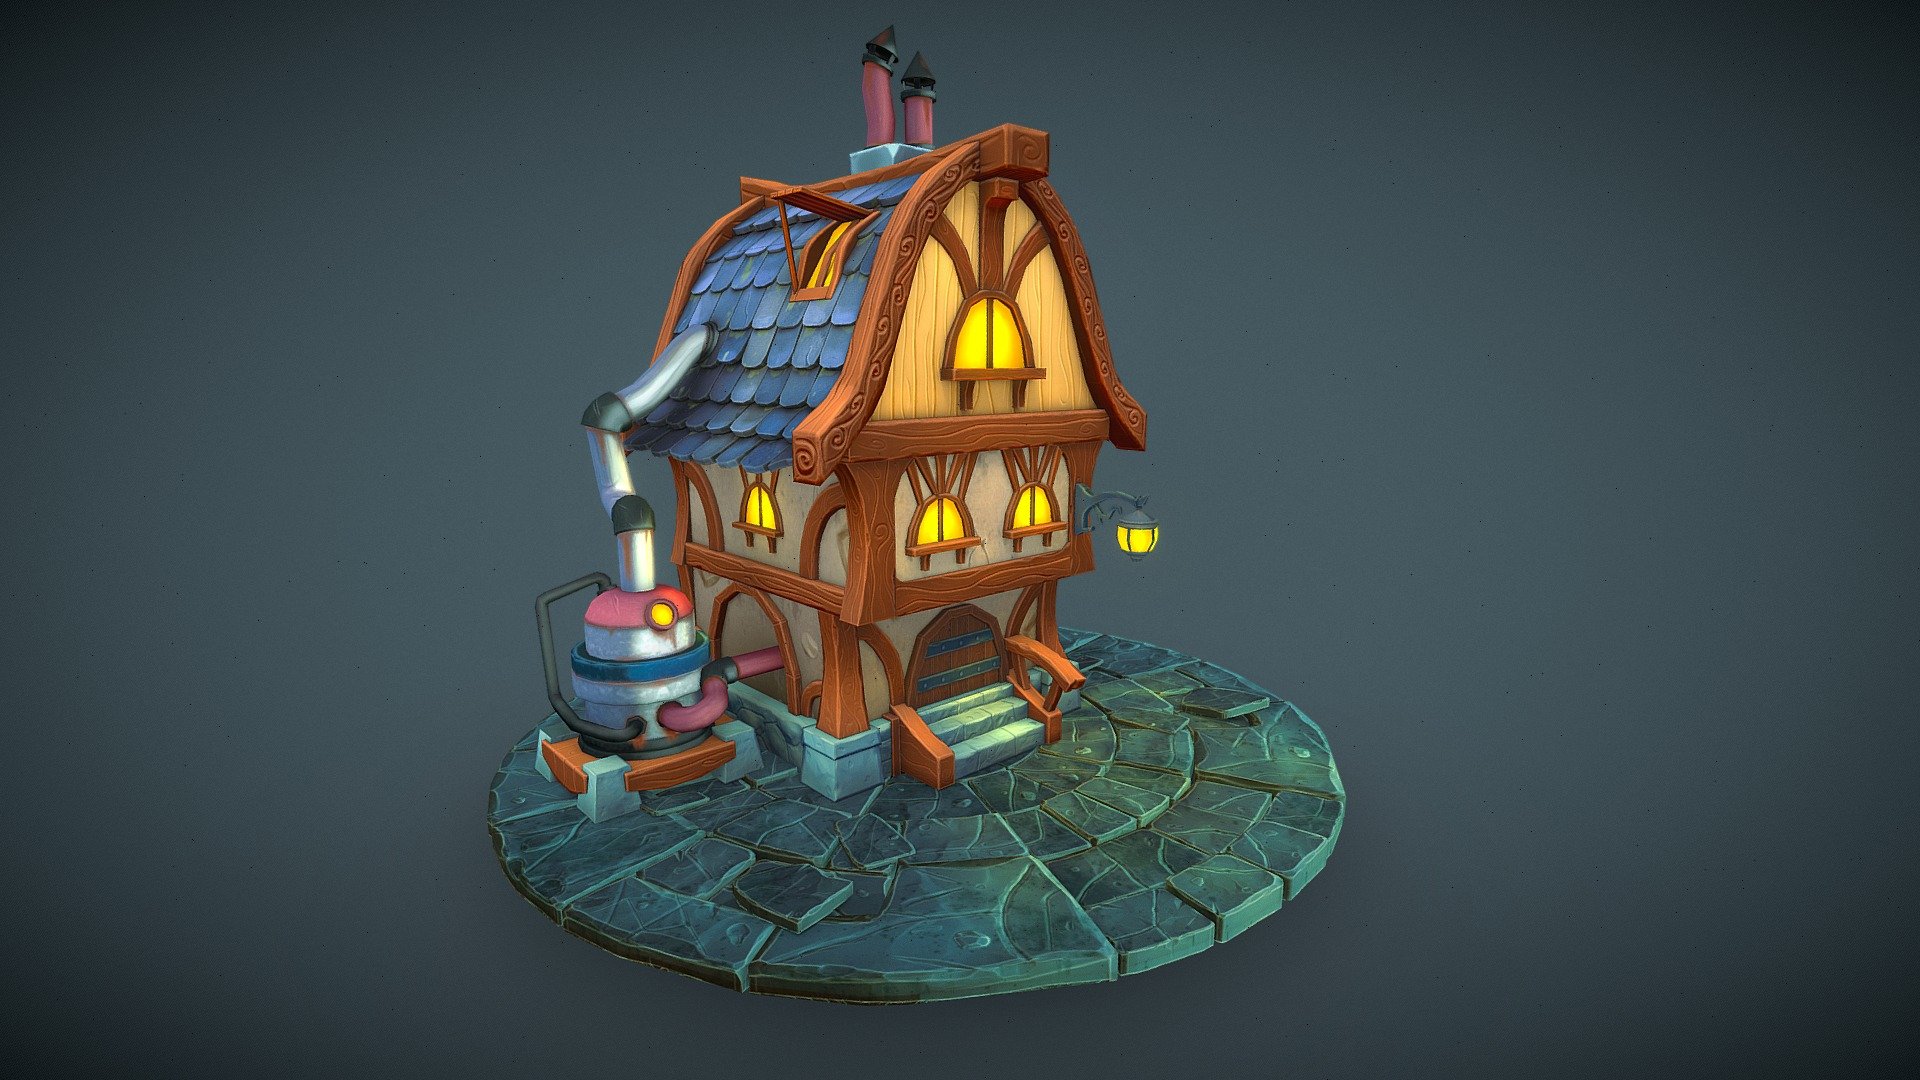 Model based on a amazing 2d concept wonderful artist by LDmitry Morozov's (https://polycount.com/discussion/156599/dmitry-morozovs-sketchbook). Modeled in Blender, painted using substance Painter and 3Dcoat.=) - public house - 3D model by Roman_Nilikovskii 3d model